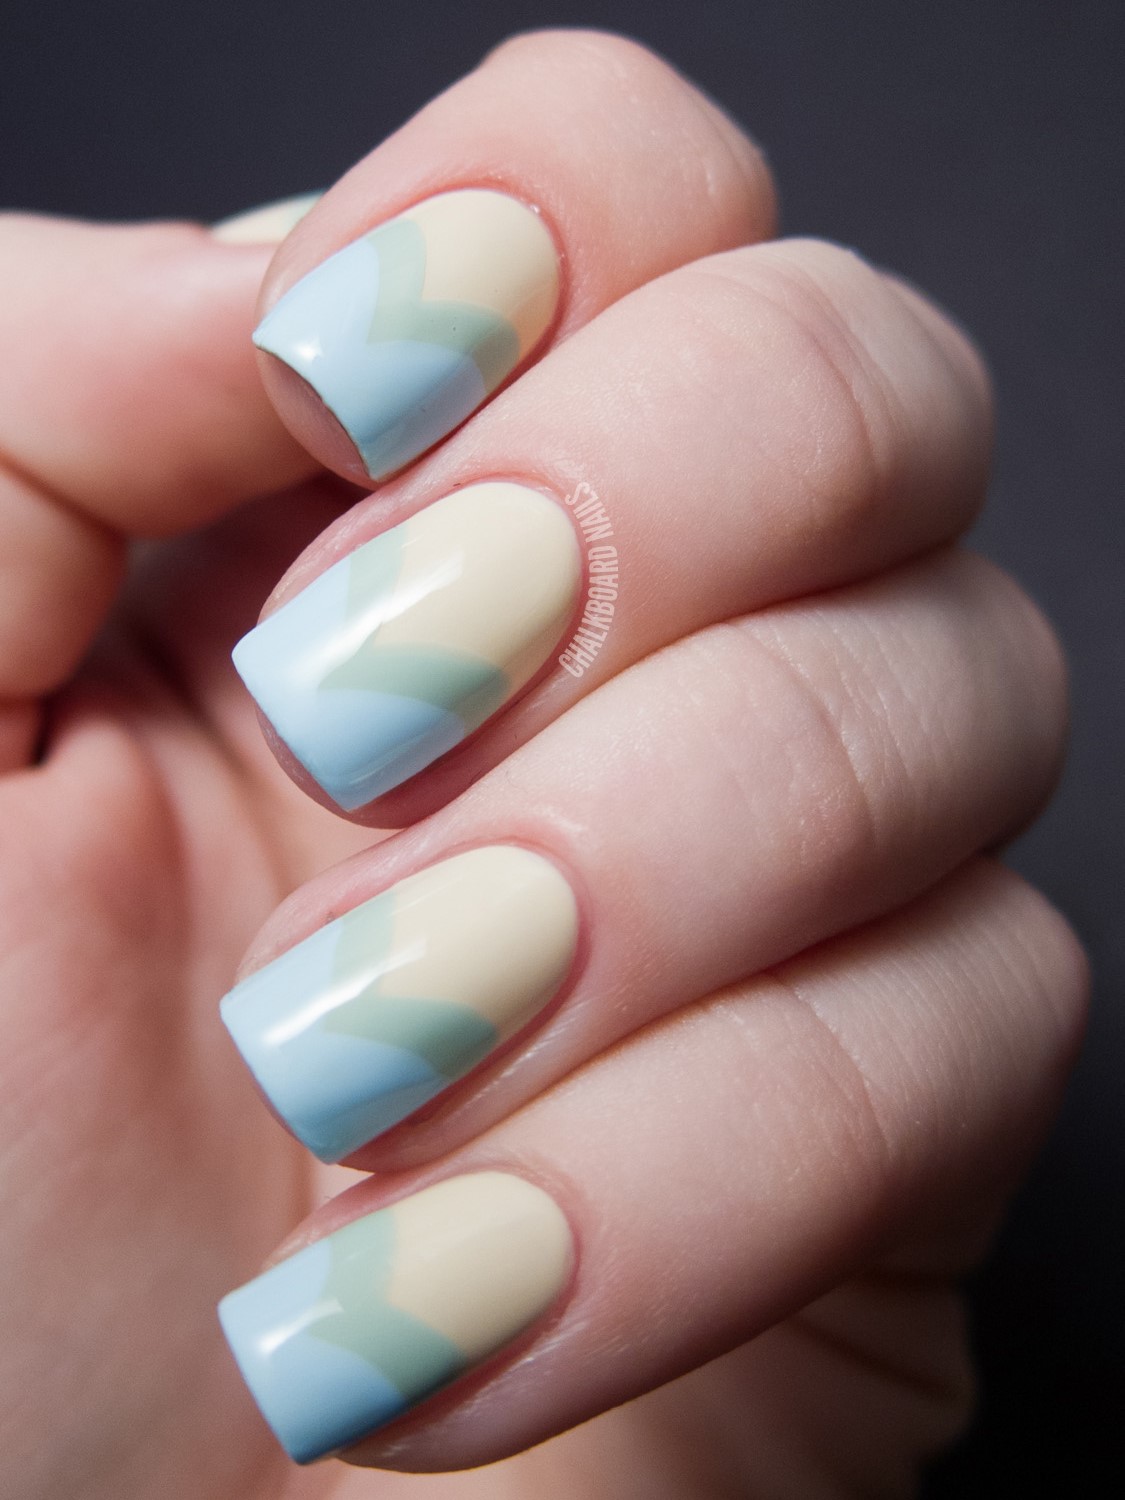 nail-art-ideas-for-spring-pastel-colors